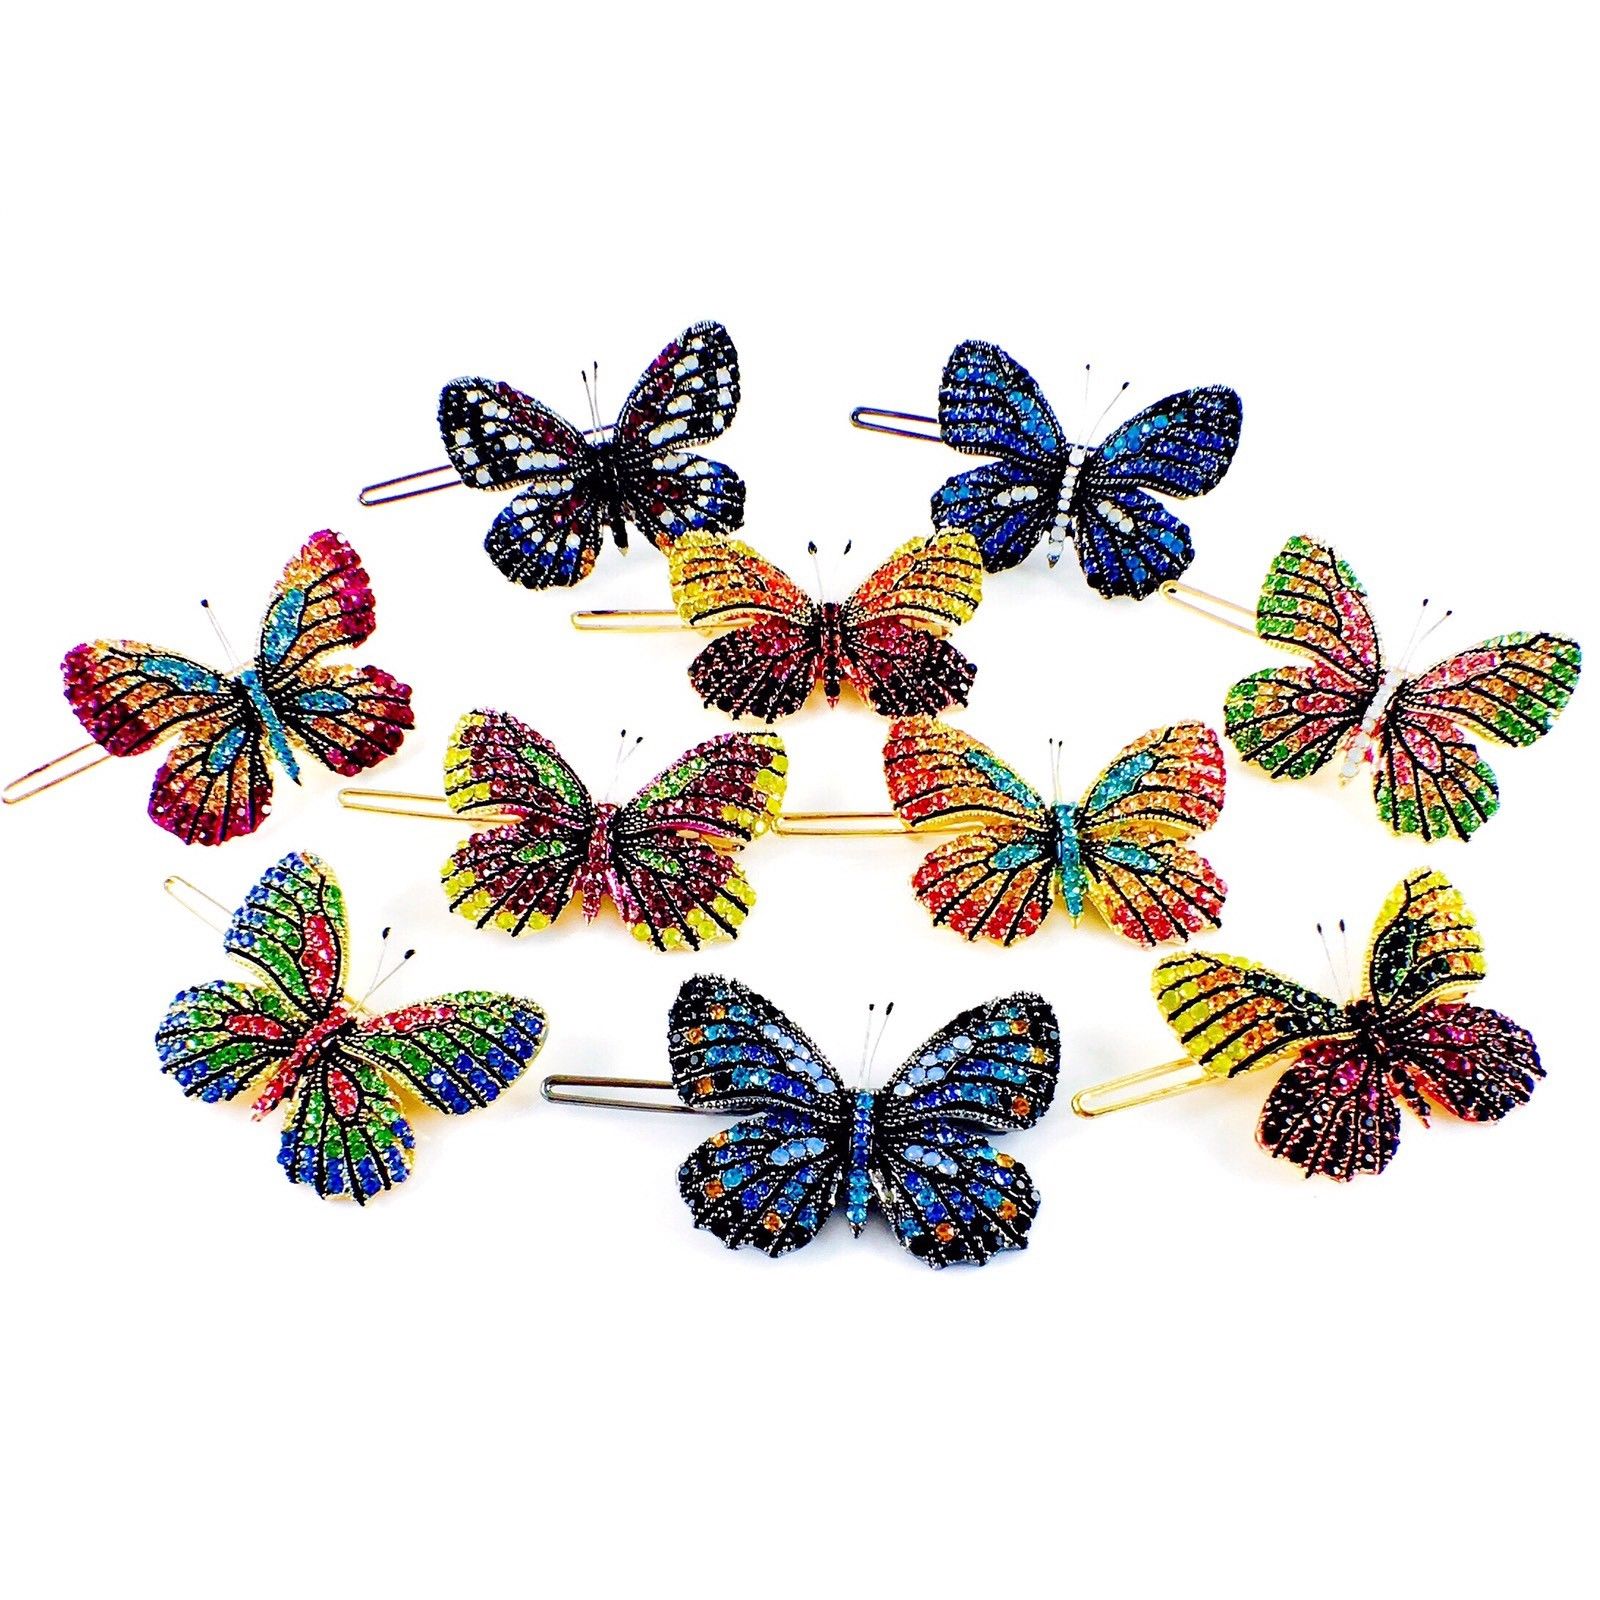 Fairy Butterfly Hair Clip Swarovski Crystal gold base multi colors Blue Green Pink, Hair Clip - MOGHANT